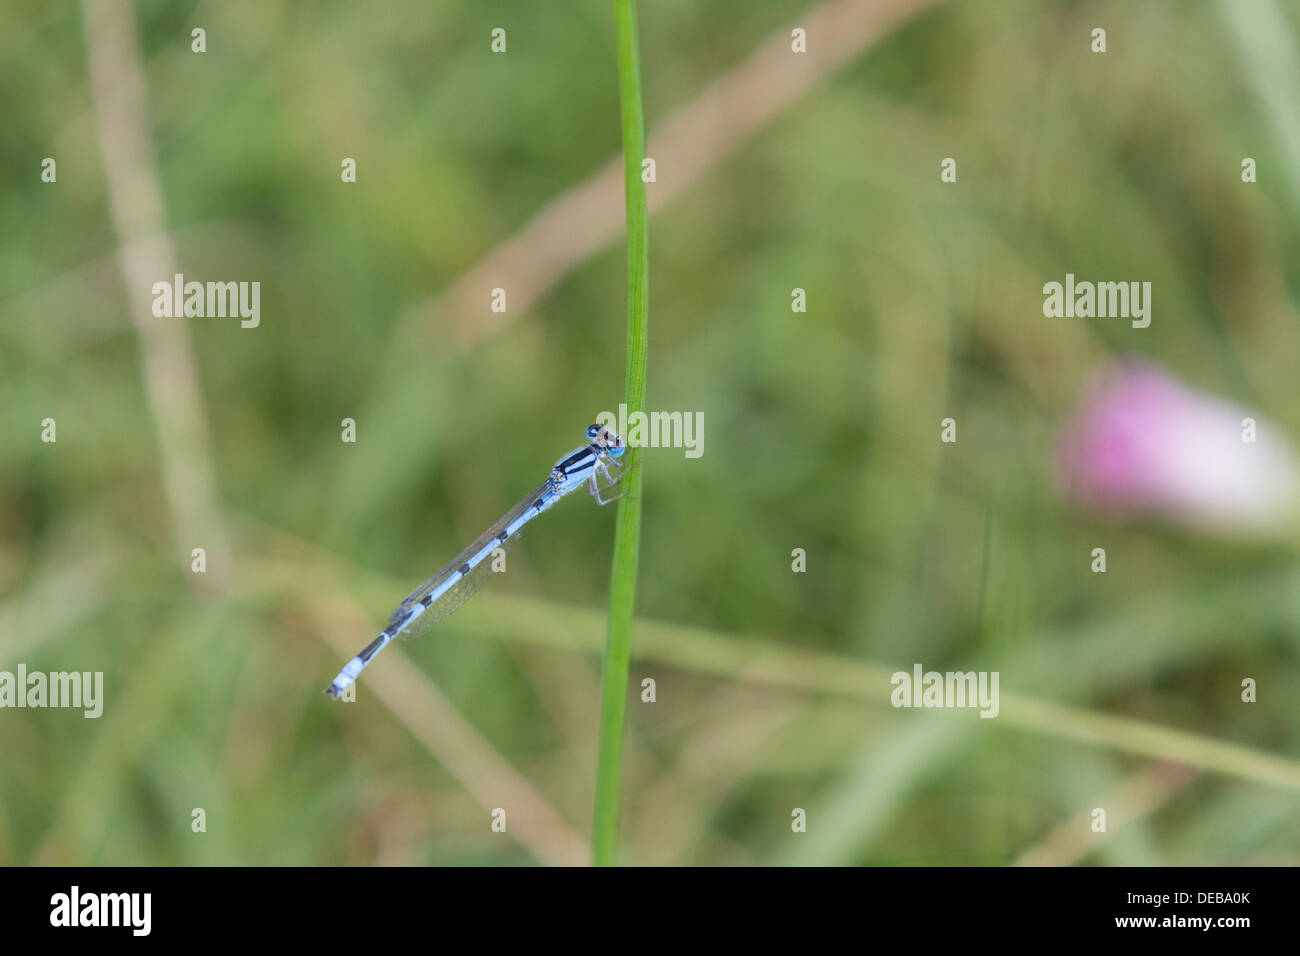 A blue damselfly (Zygoptera) on a blade of grass Stock Photo